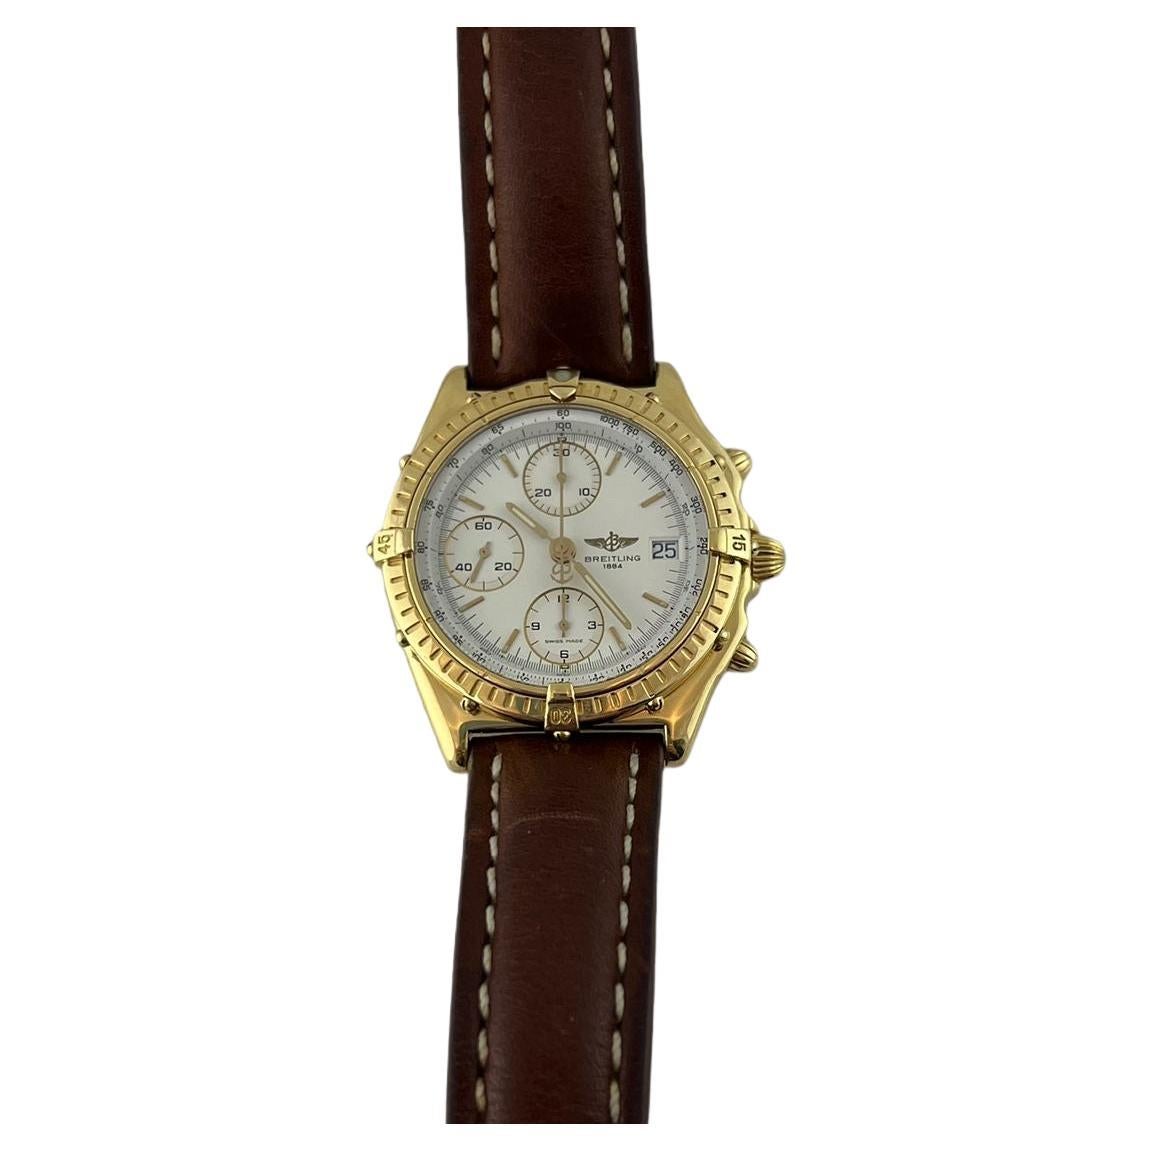 Breitling Chronomat 18k Yellow Gold Men's Watch Leather Band K13047X For Sale